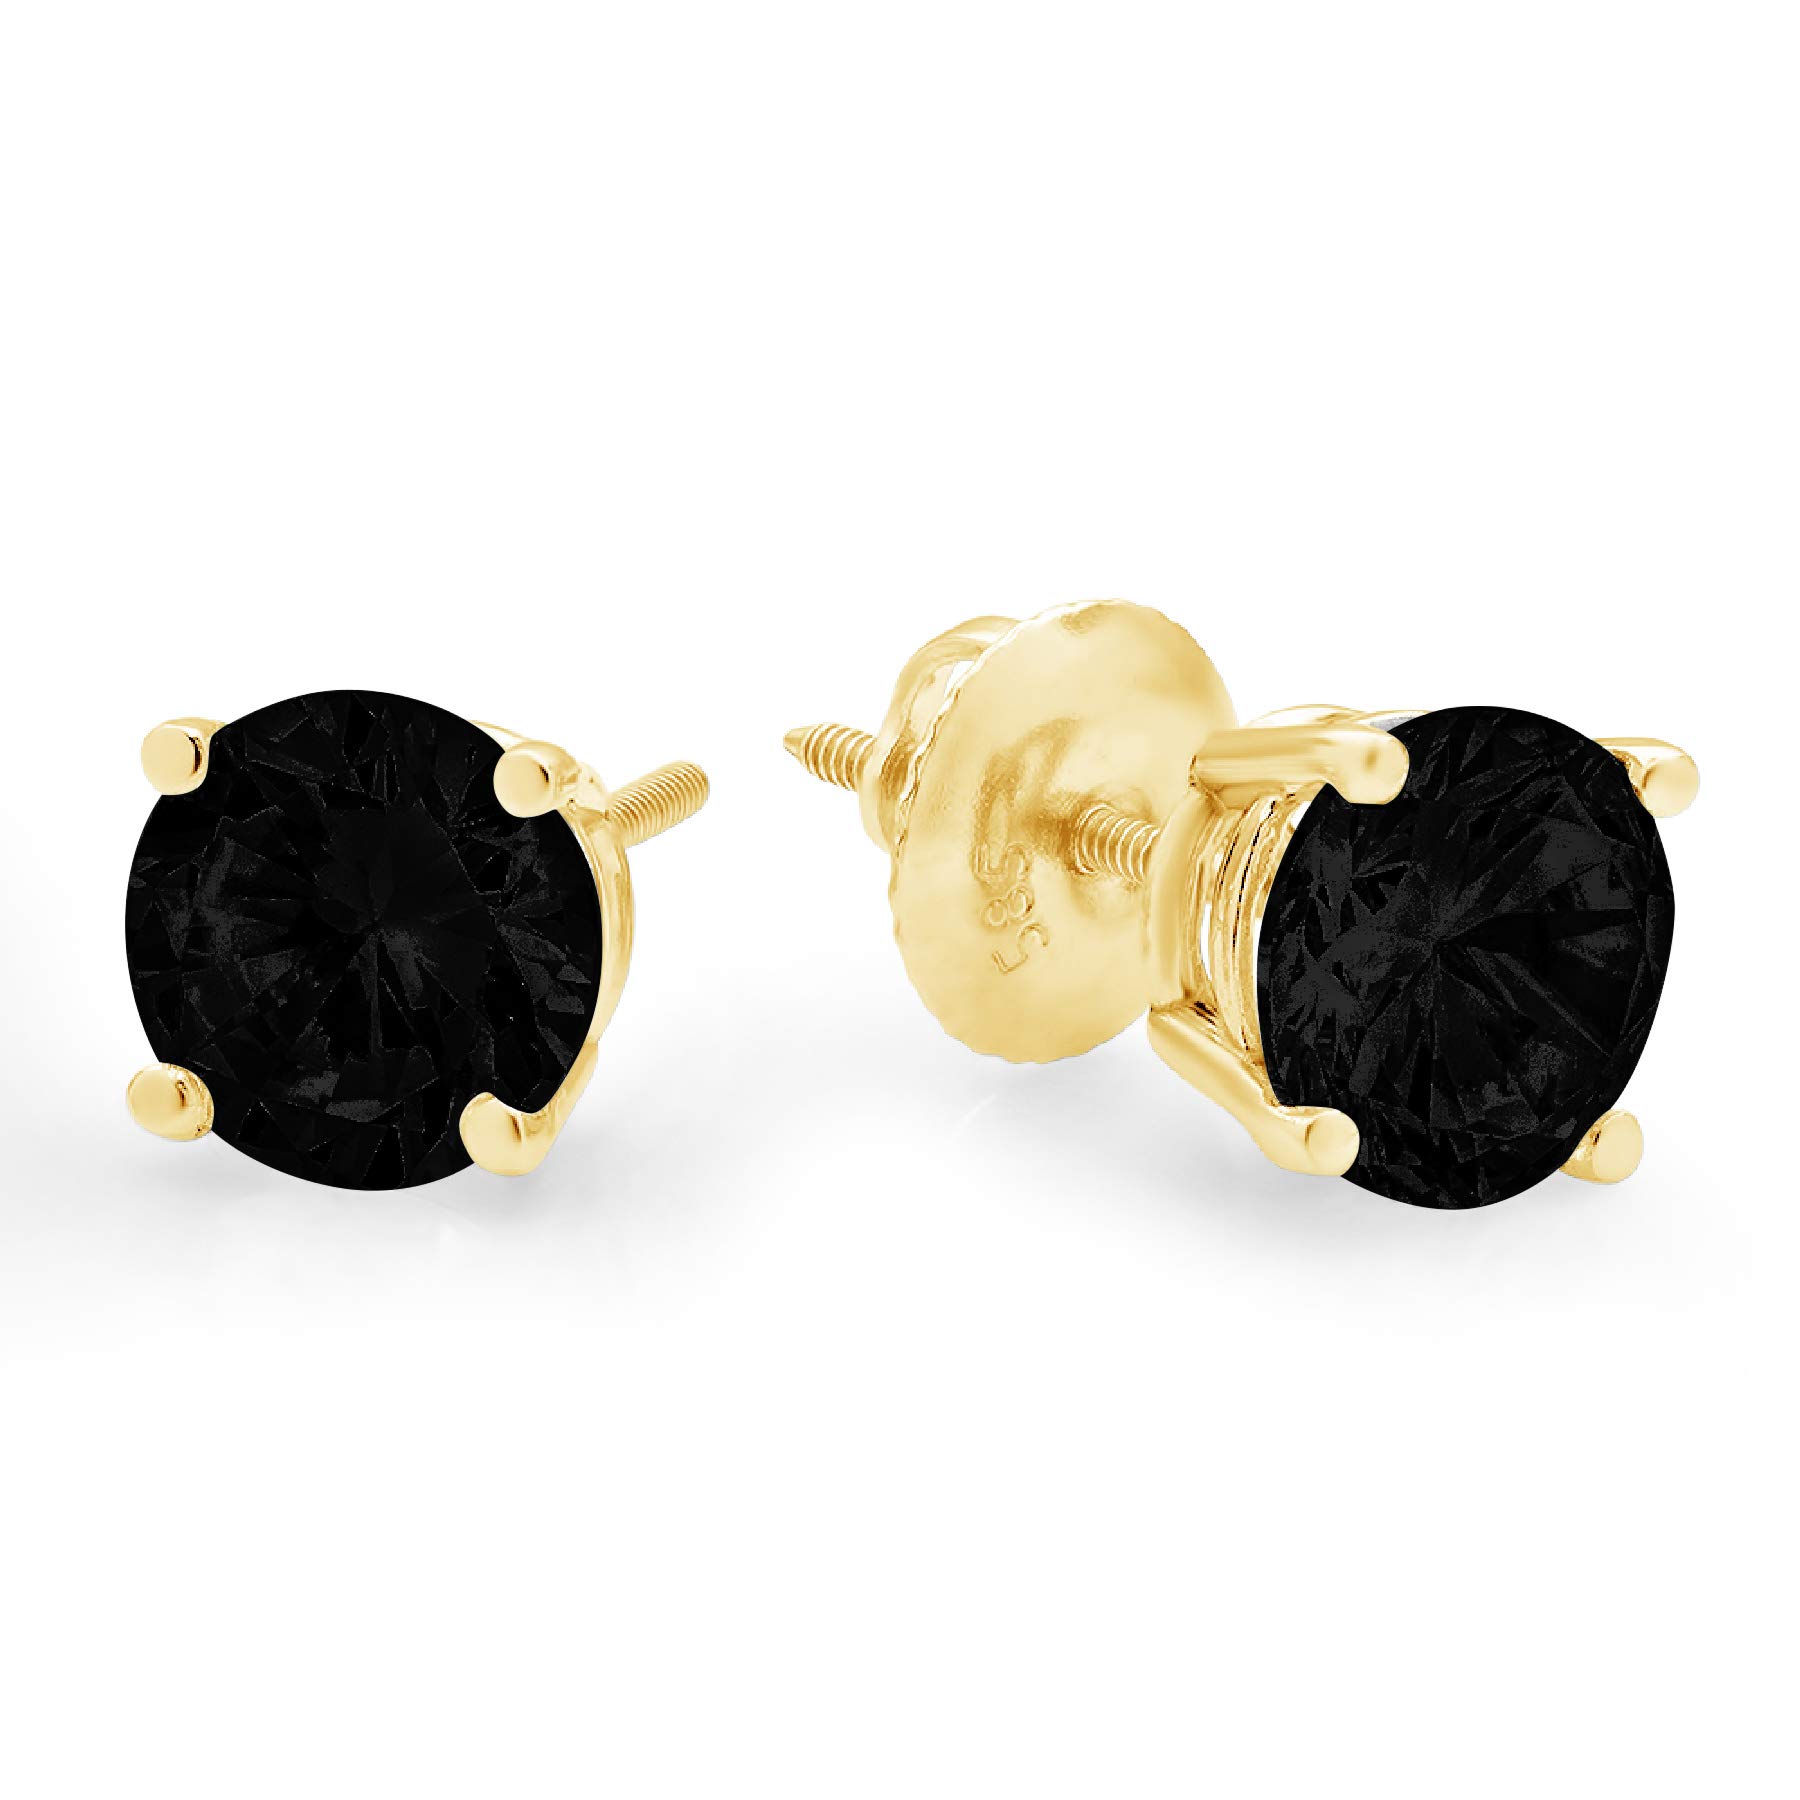 2.9ct Brilliant Round Cut Solitaire Flawless Genuine Natural Black Onyx Gemstone Unisex Pair of Stud Designer Earrings Solid 14k Yellow Gold Screw Back conflict free Jewelry